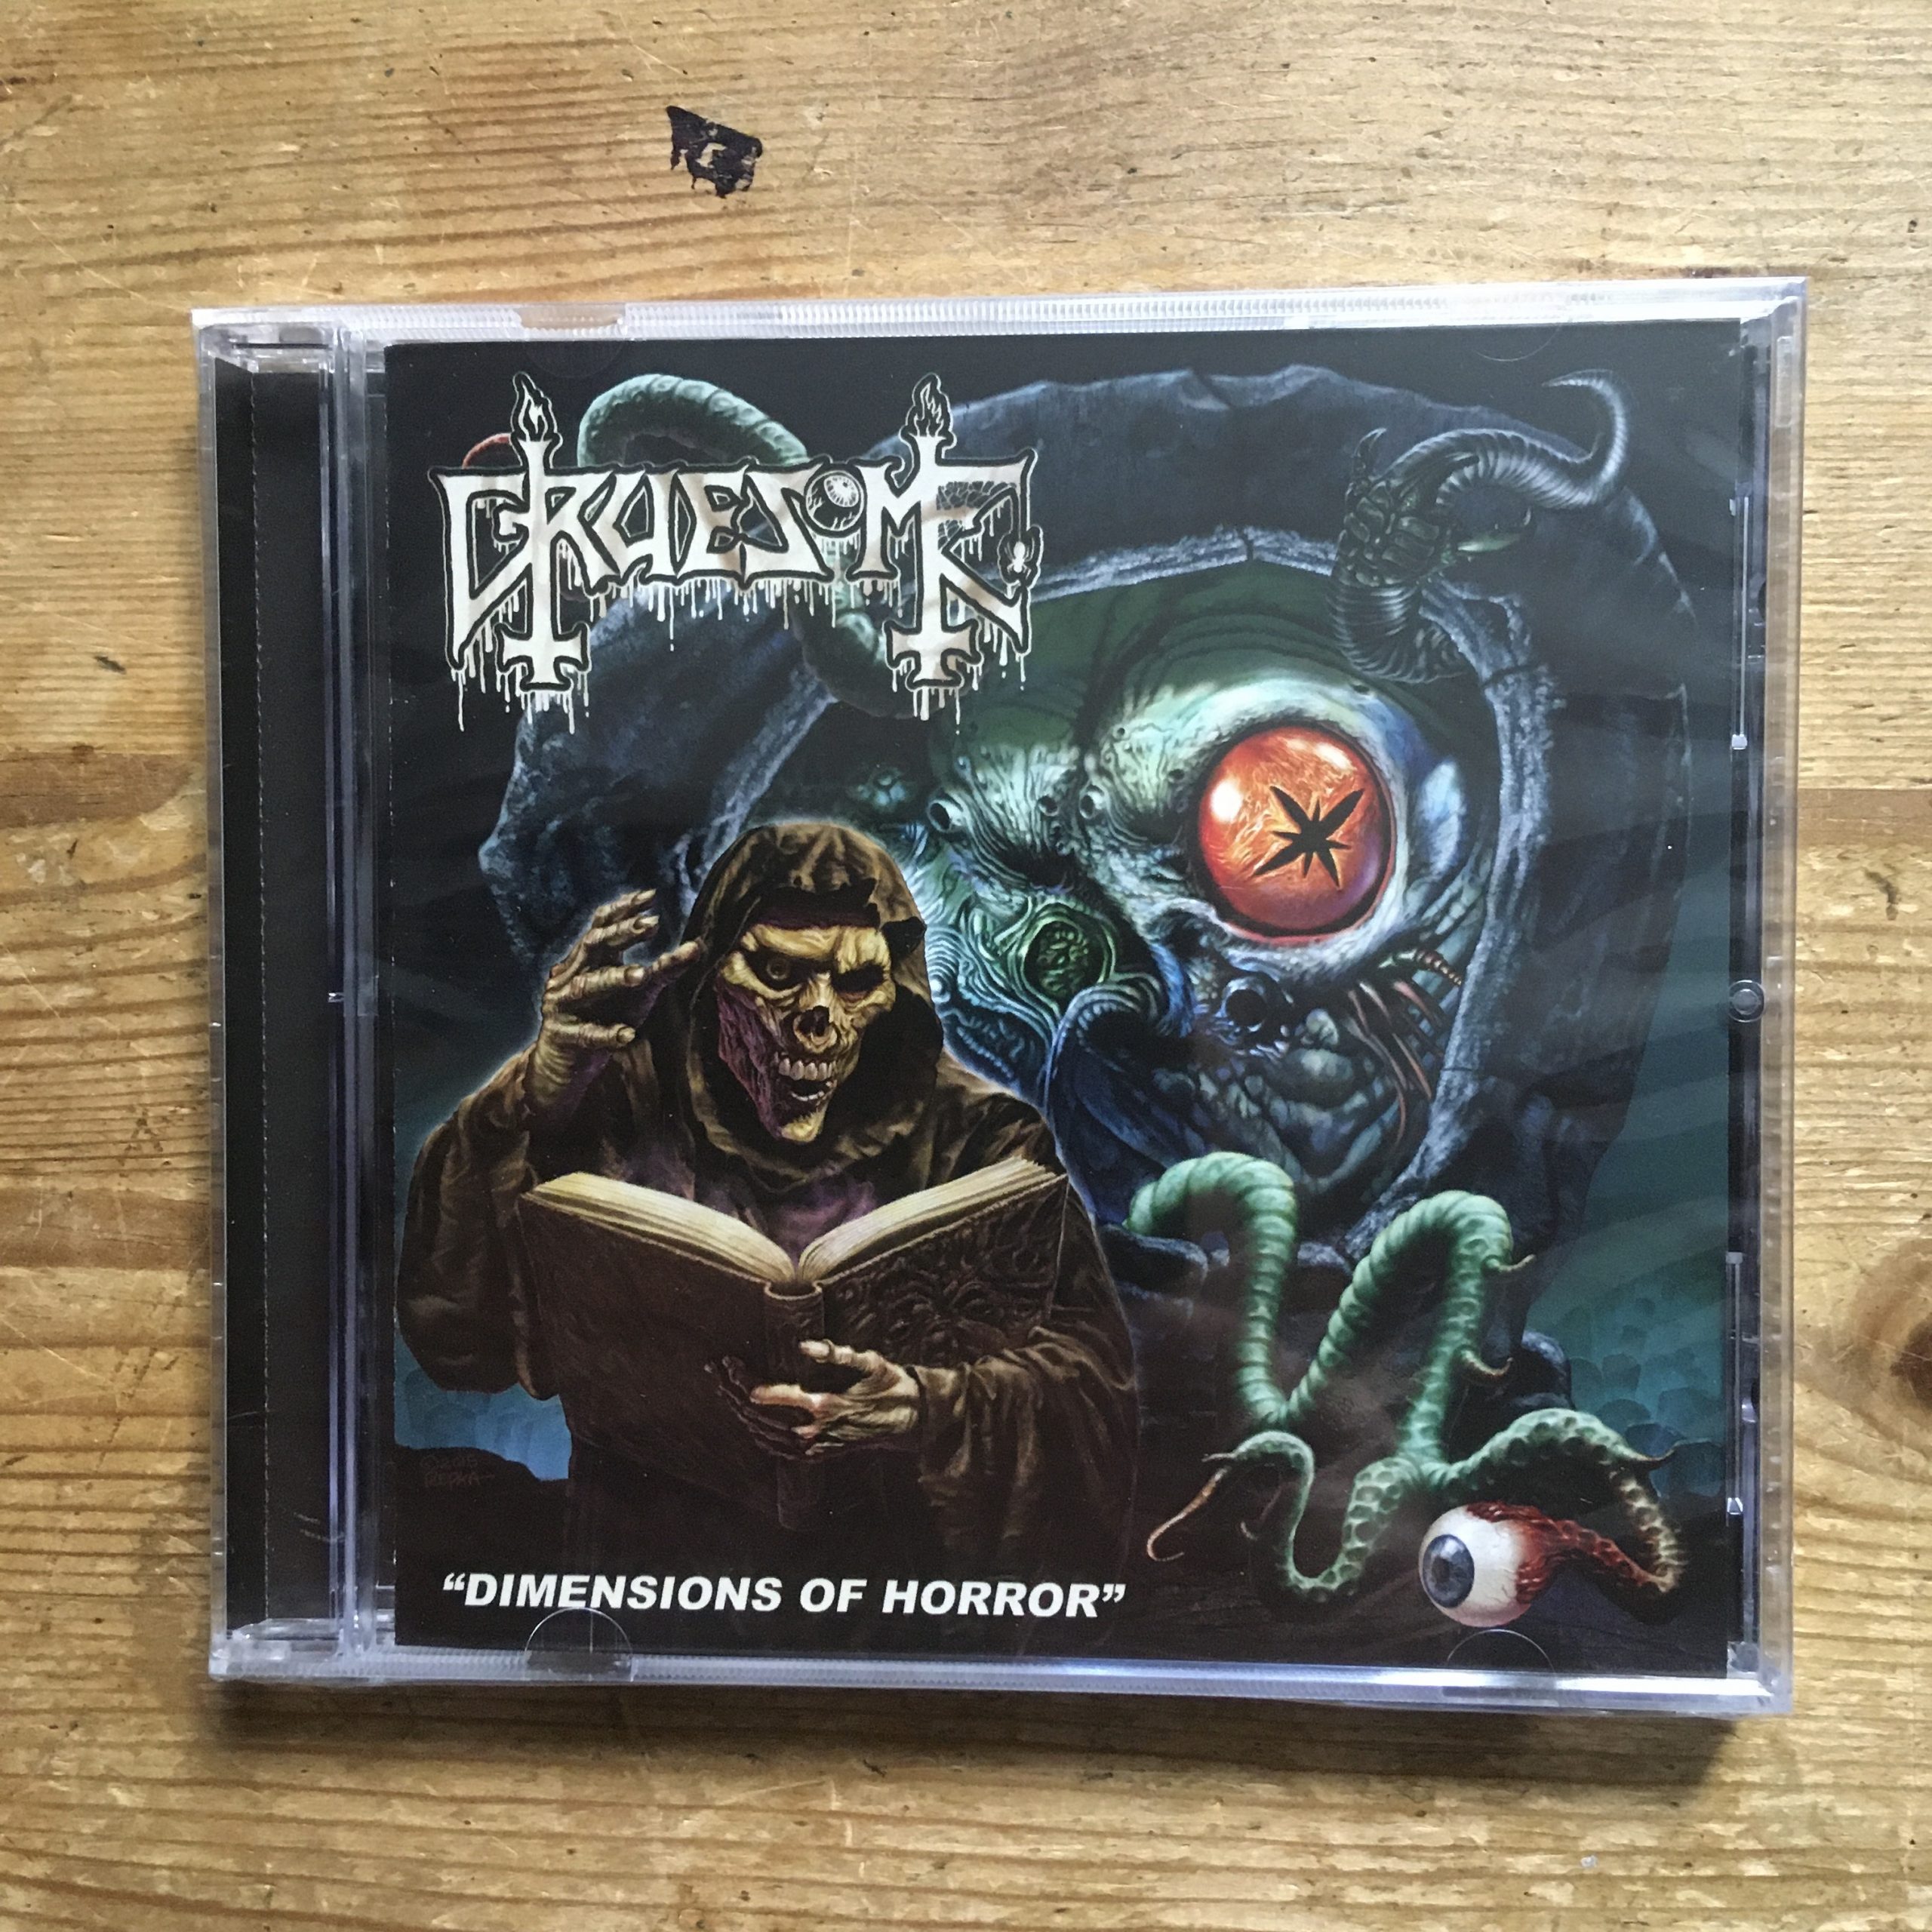 Photo of the Gruesome - "Dimensions of Horror" CD